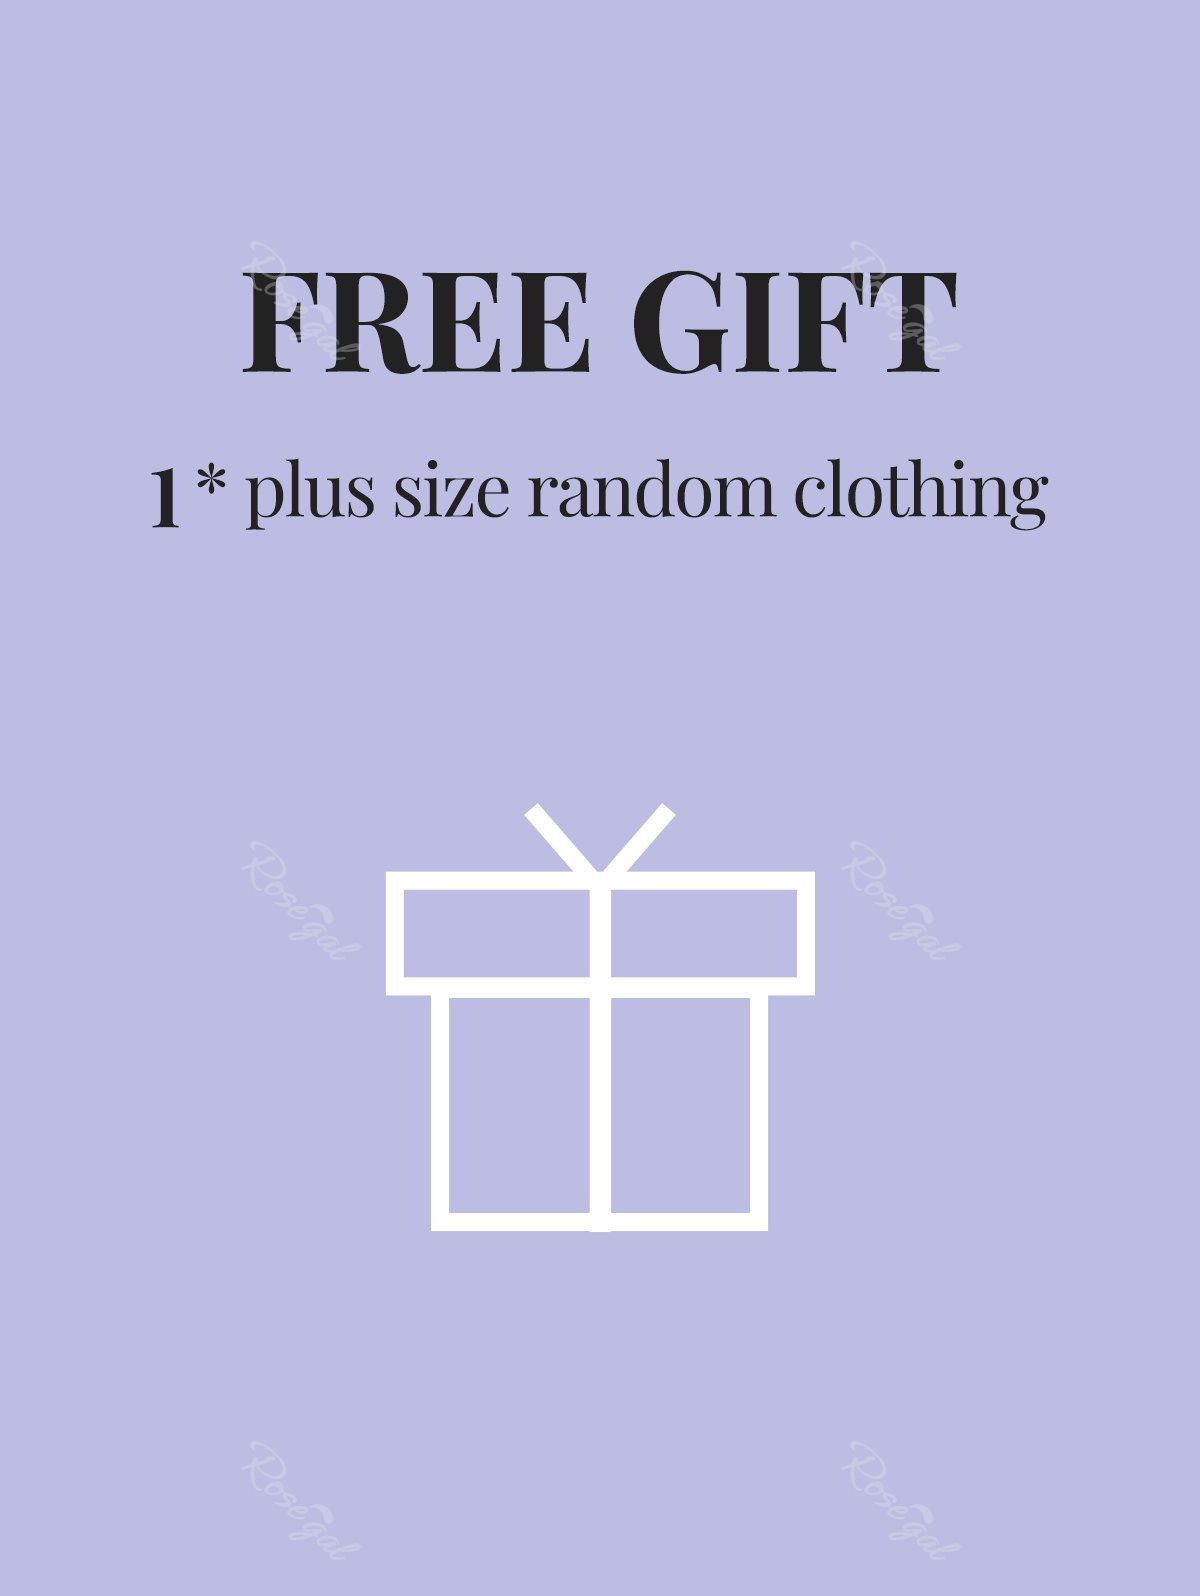 Best ROSEGAL Free Gift - A Piece of Plus Size Random Clothing  